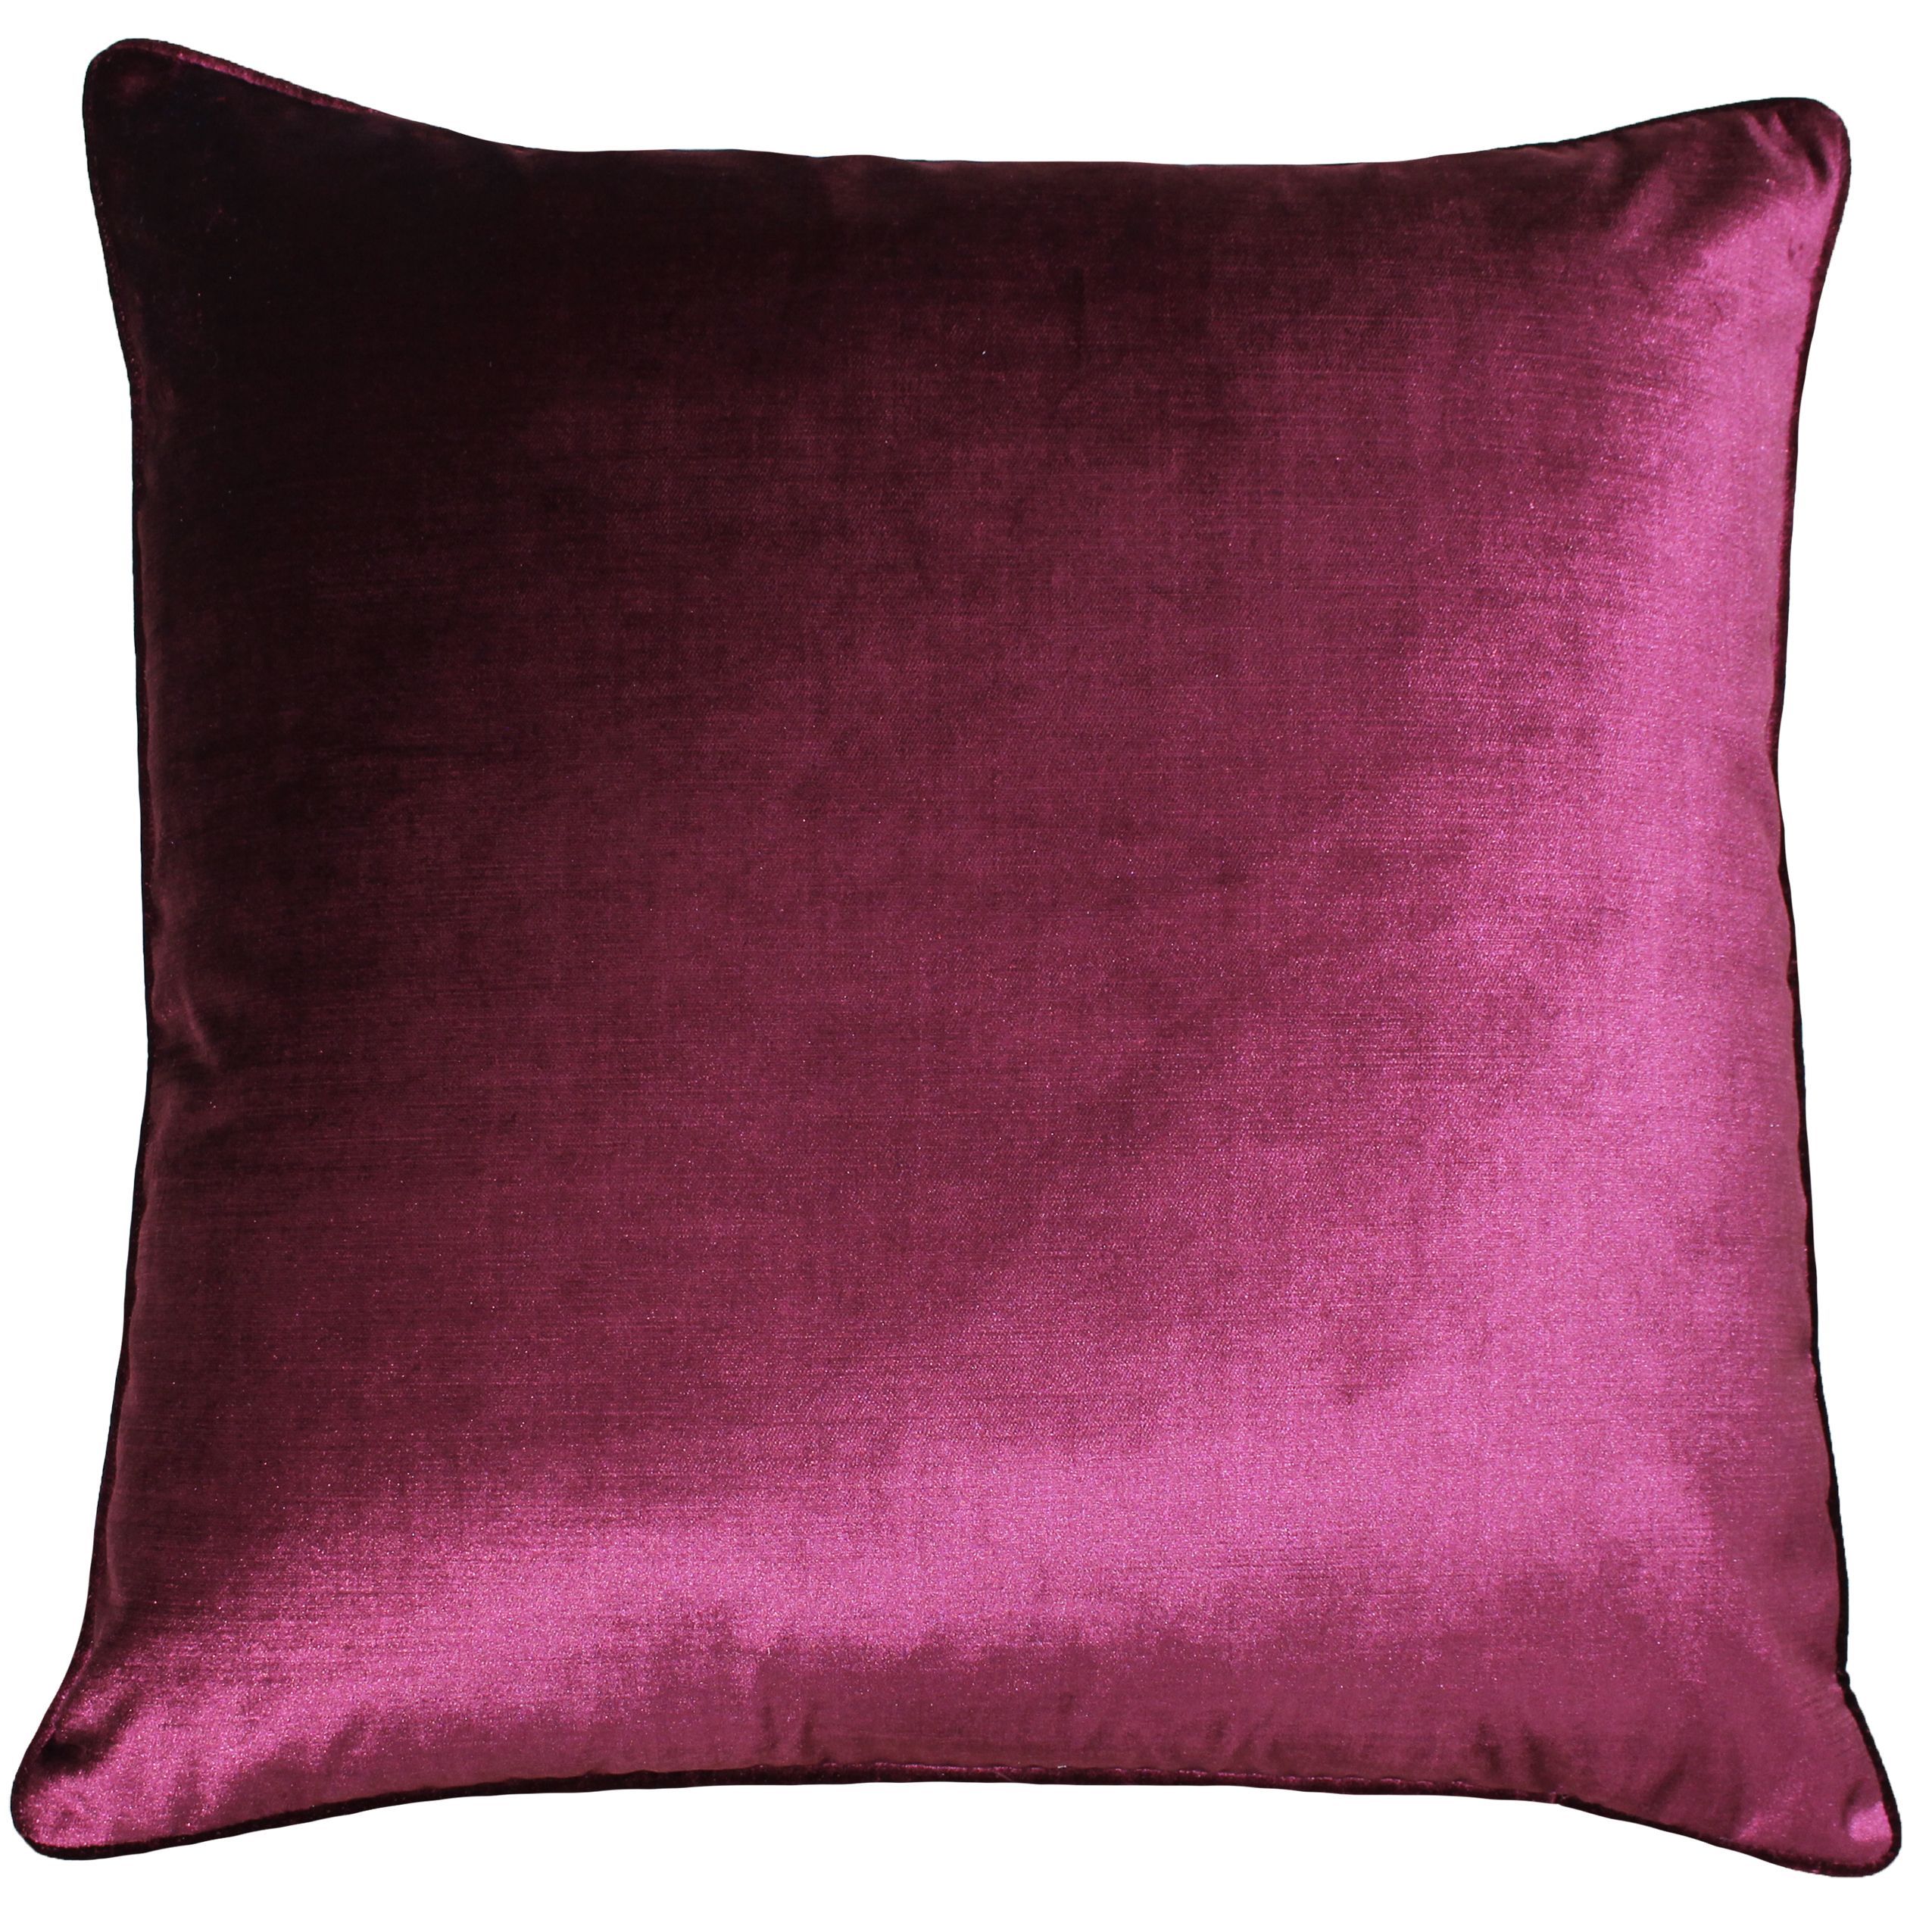 Classic and effortless the Luxe Velvet Polyester Filled Cushion works in a range of home interiors. This gorgeous Polyester Filled Cushion has an incredibly soft faux velvet front and reverse giving it an opulent sheen. With such a huge range of colours available you’ll be able to mix and match to compliment any interior. With a hidden zip design and a piped border this cushion has a timeless design. Made of 100% polyester these cushions are hard-wearing making them great for households with children or pets. This Polyester Filled Cushion is also easy to care for as it is fully machine washable at 30 degrees and tumble dry and iron appropriate.